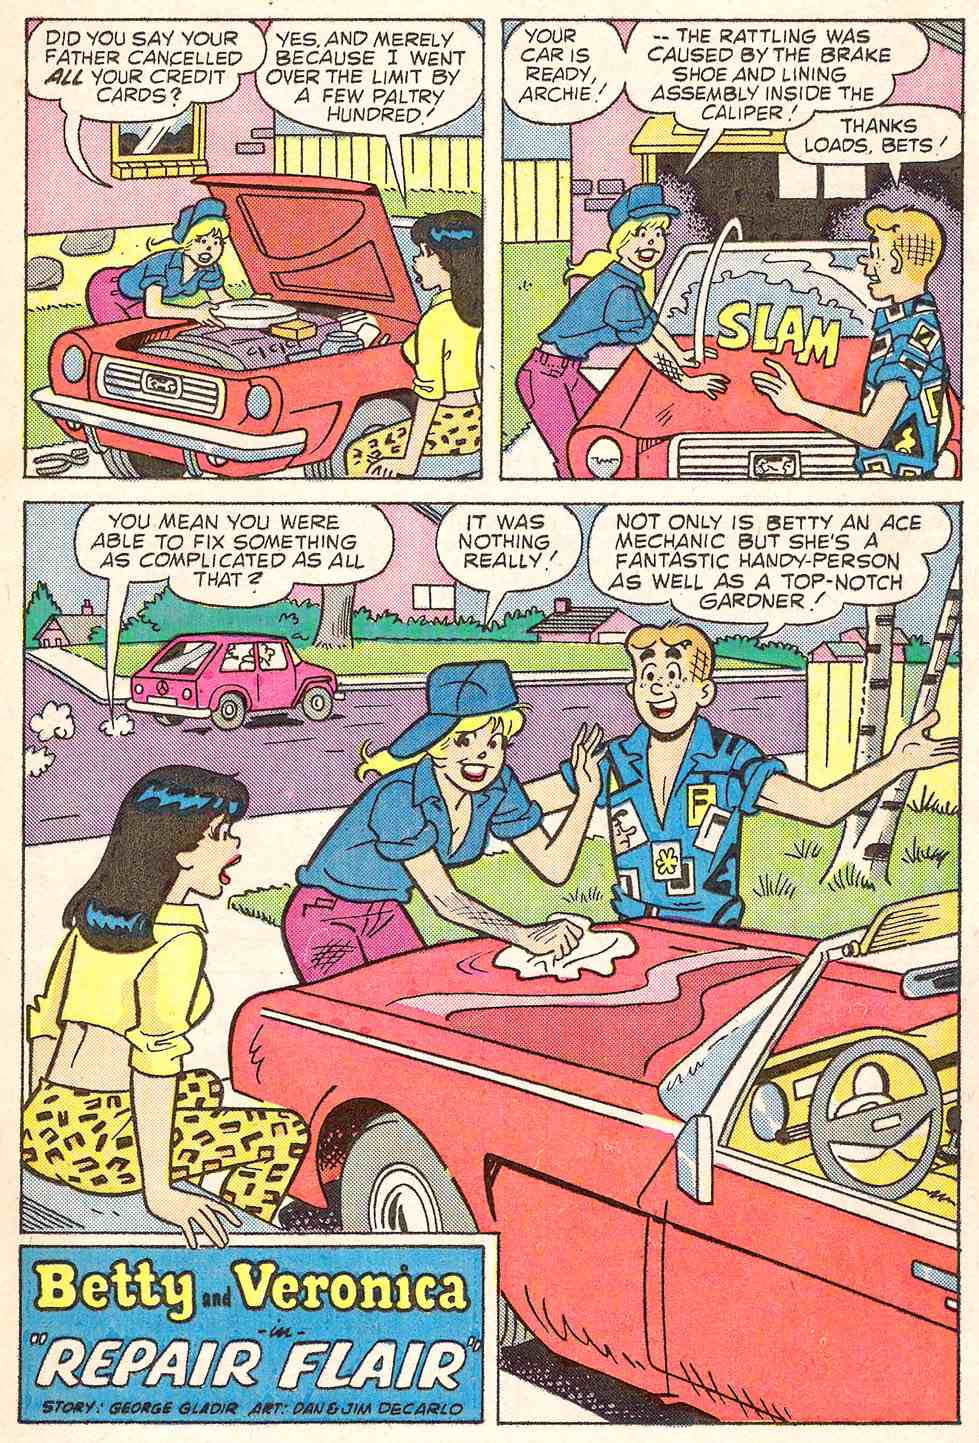 Read online Archie's Girls Betty and Veronica comic -  Issue #344 - 13